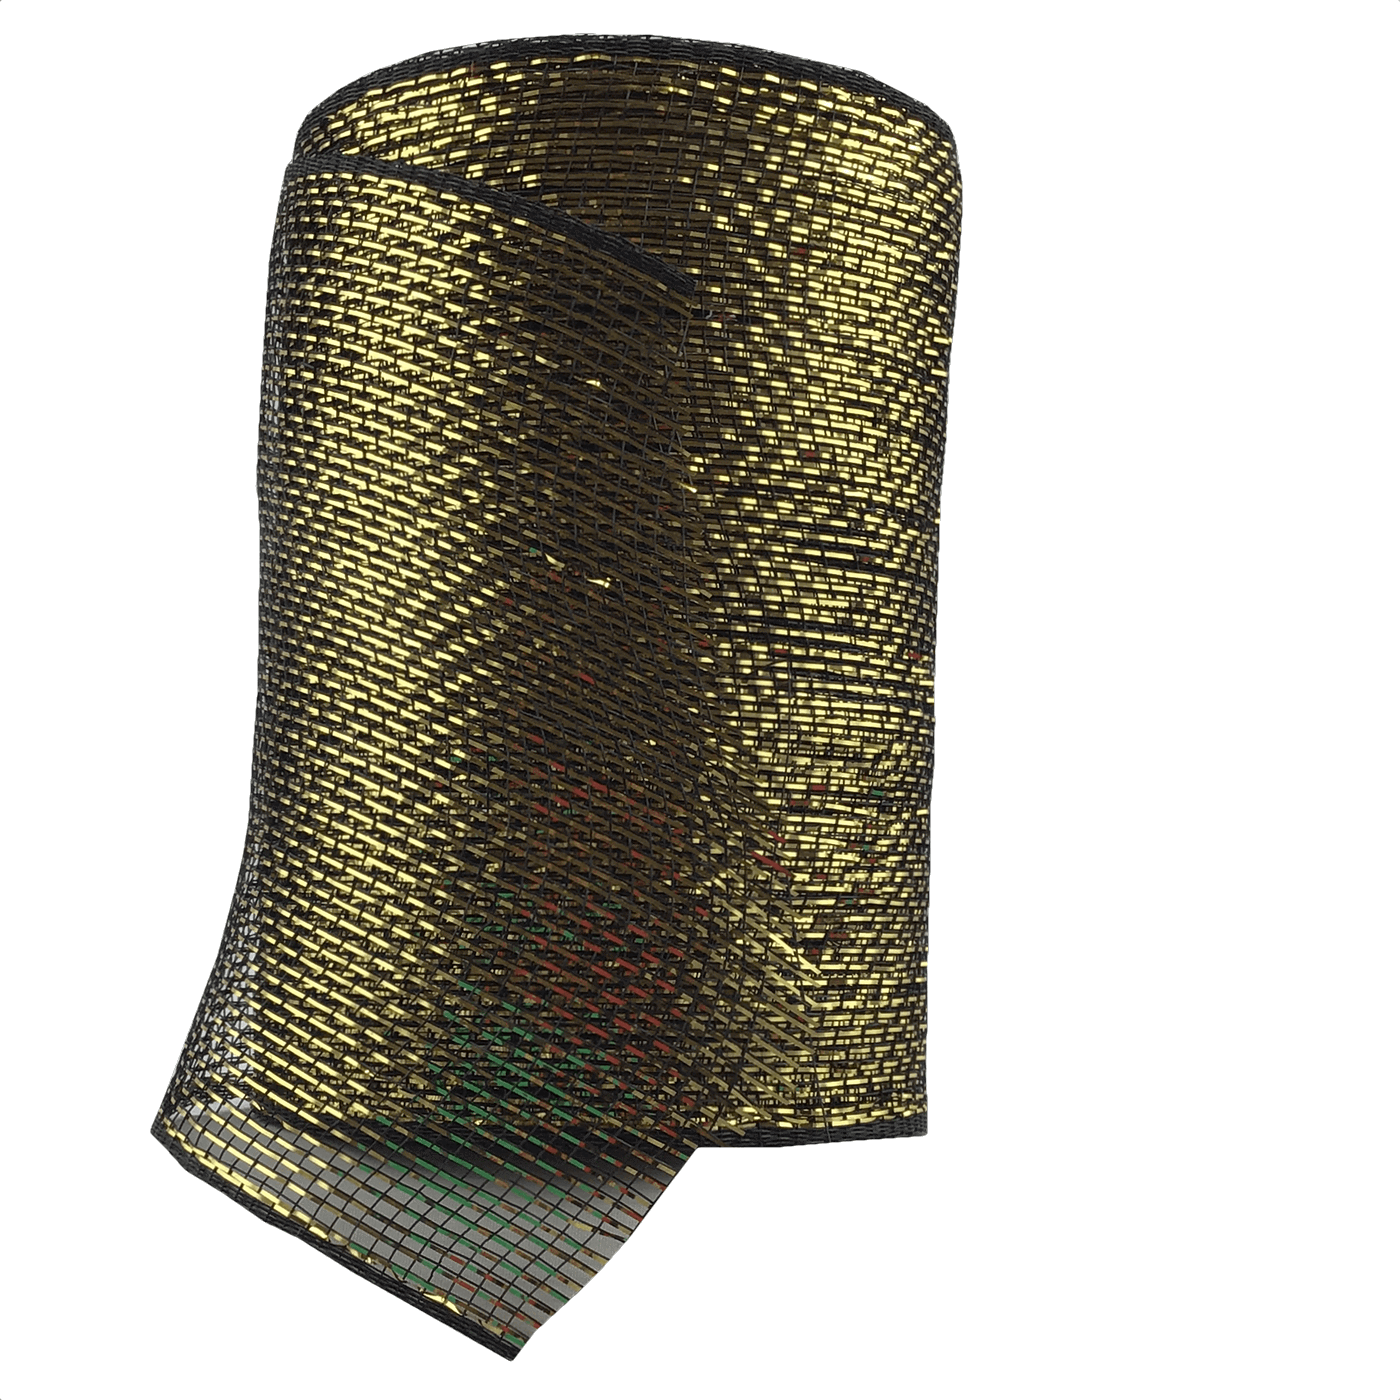 6 Inch by 20 Designer Netting Black with Gold Glamour